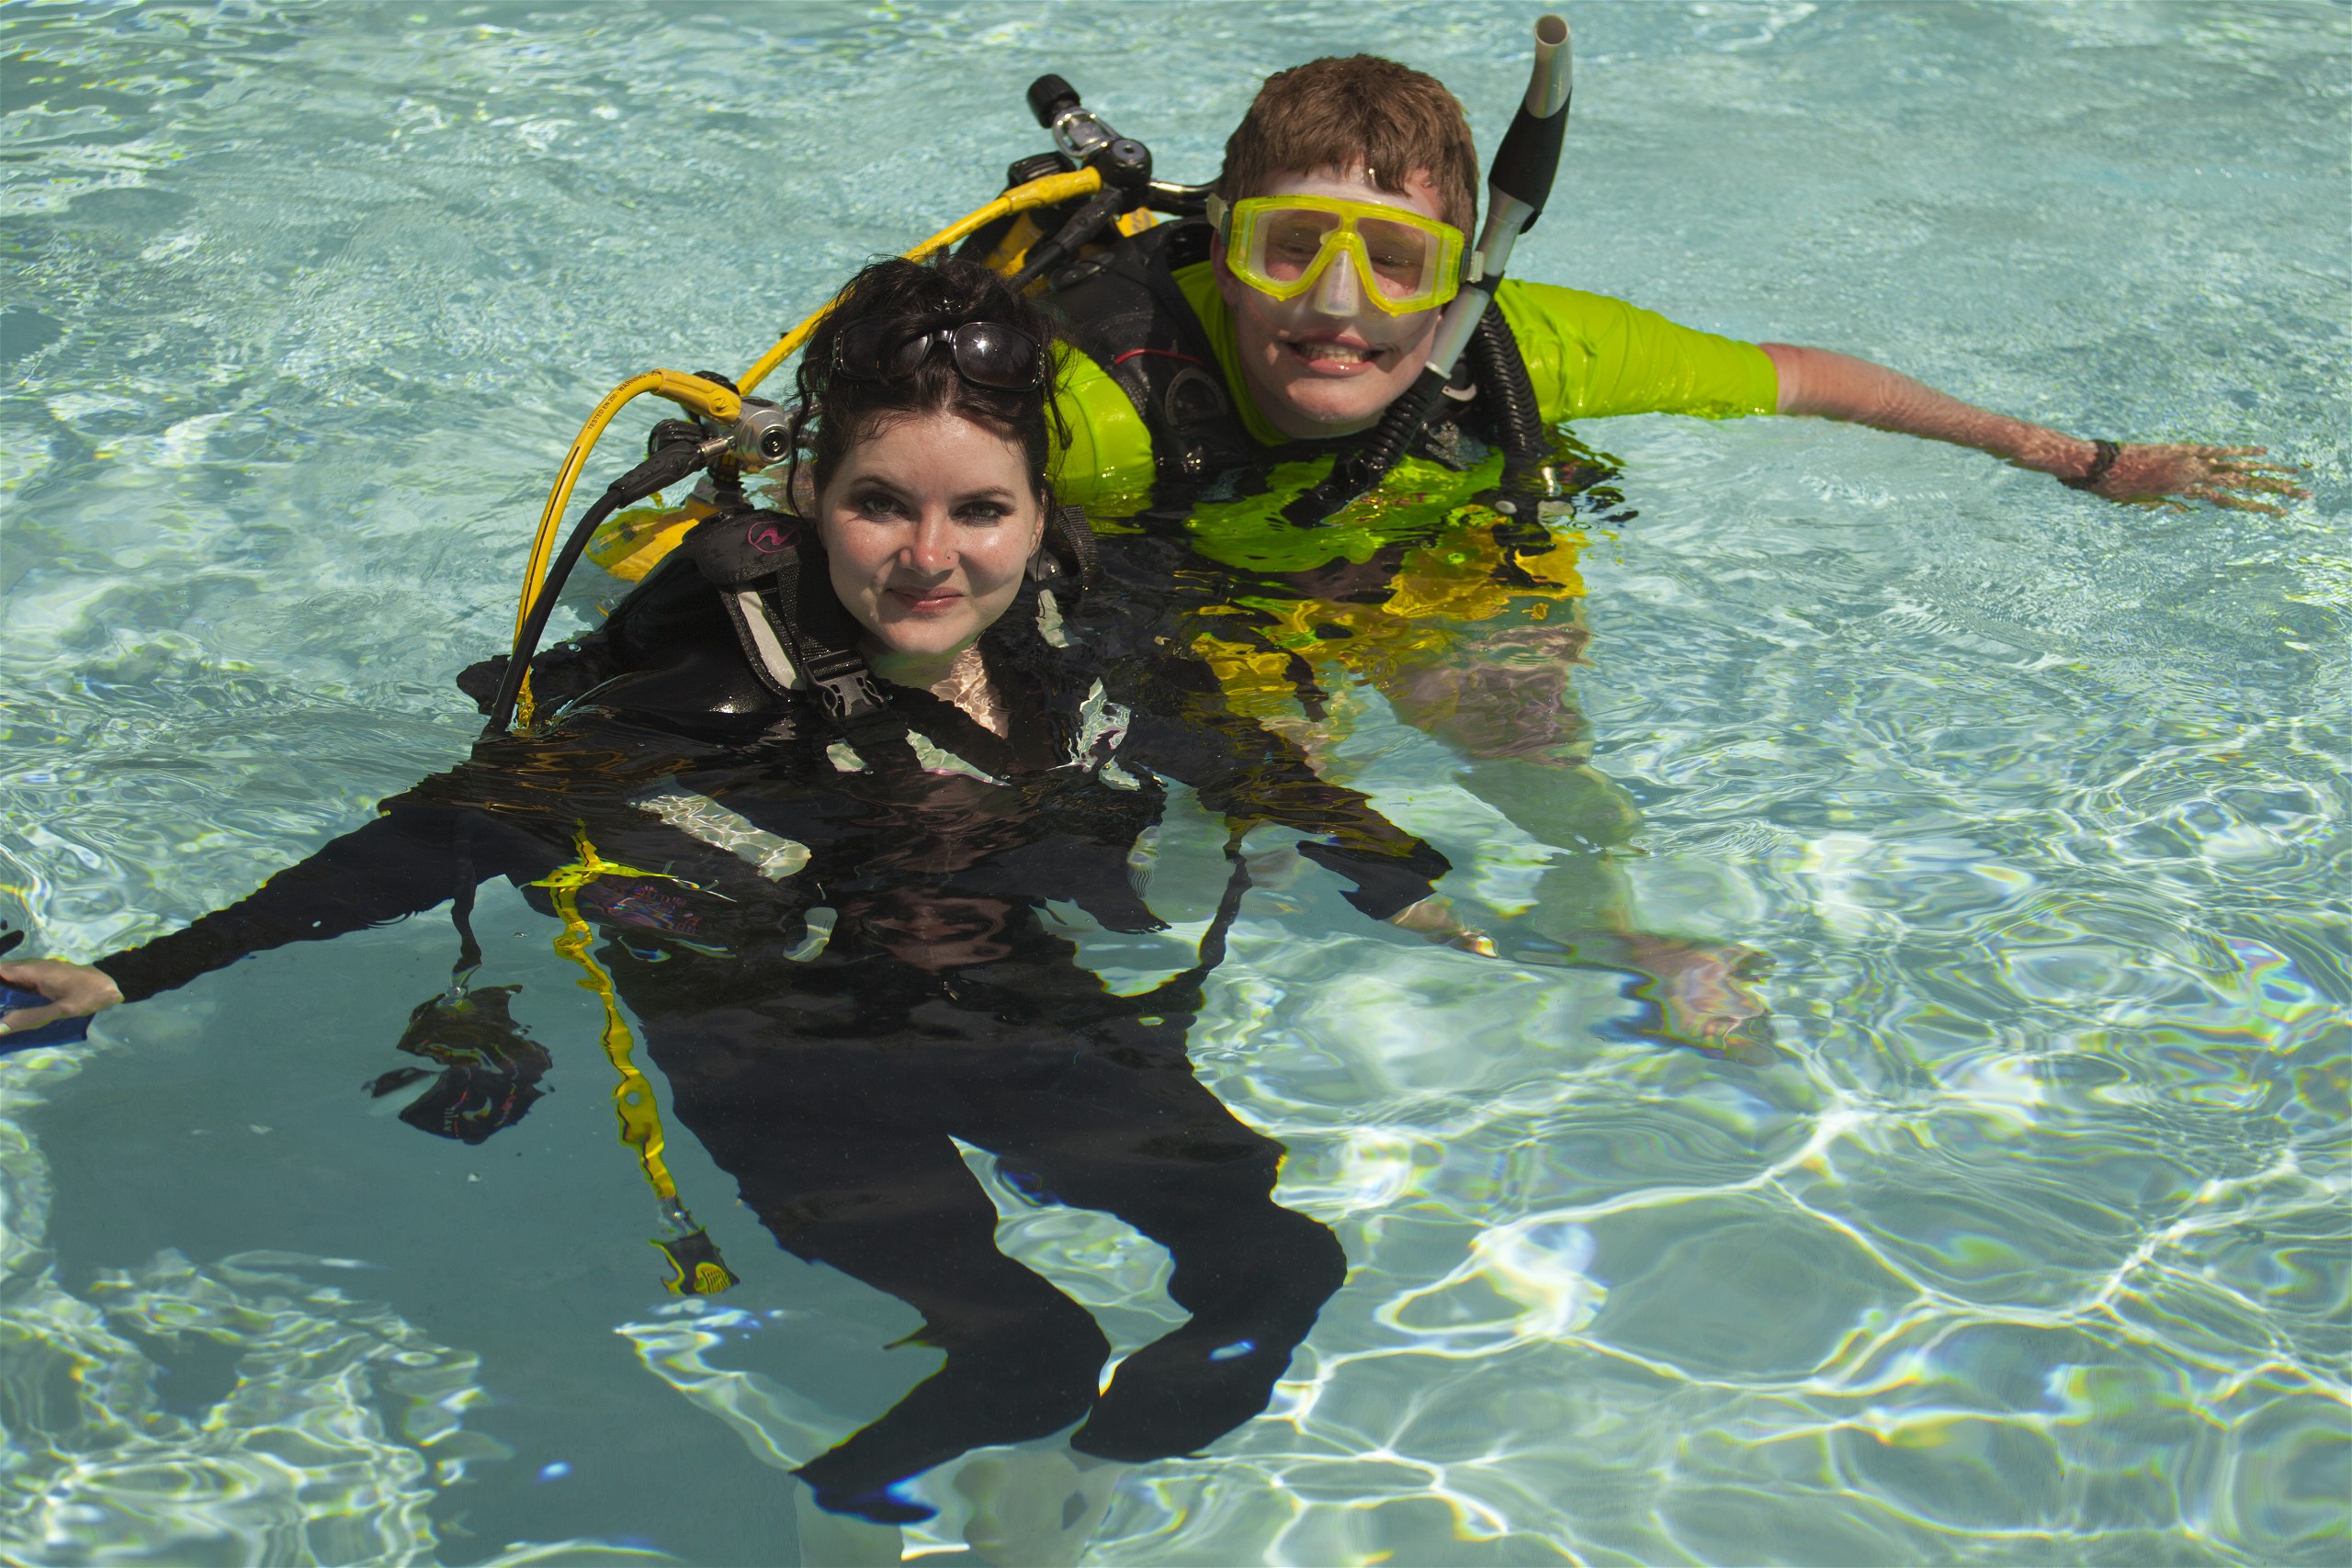 Weekend Dive Event To Showcase Diving With A Disability (Photo credit: The Cody Unser First Step Foundation & PADI)